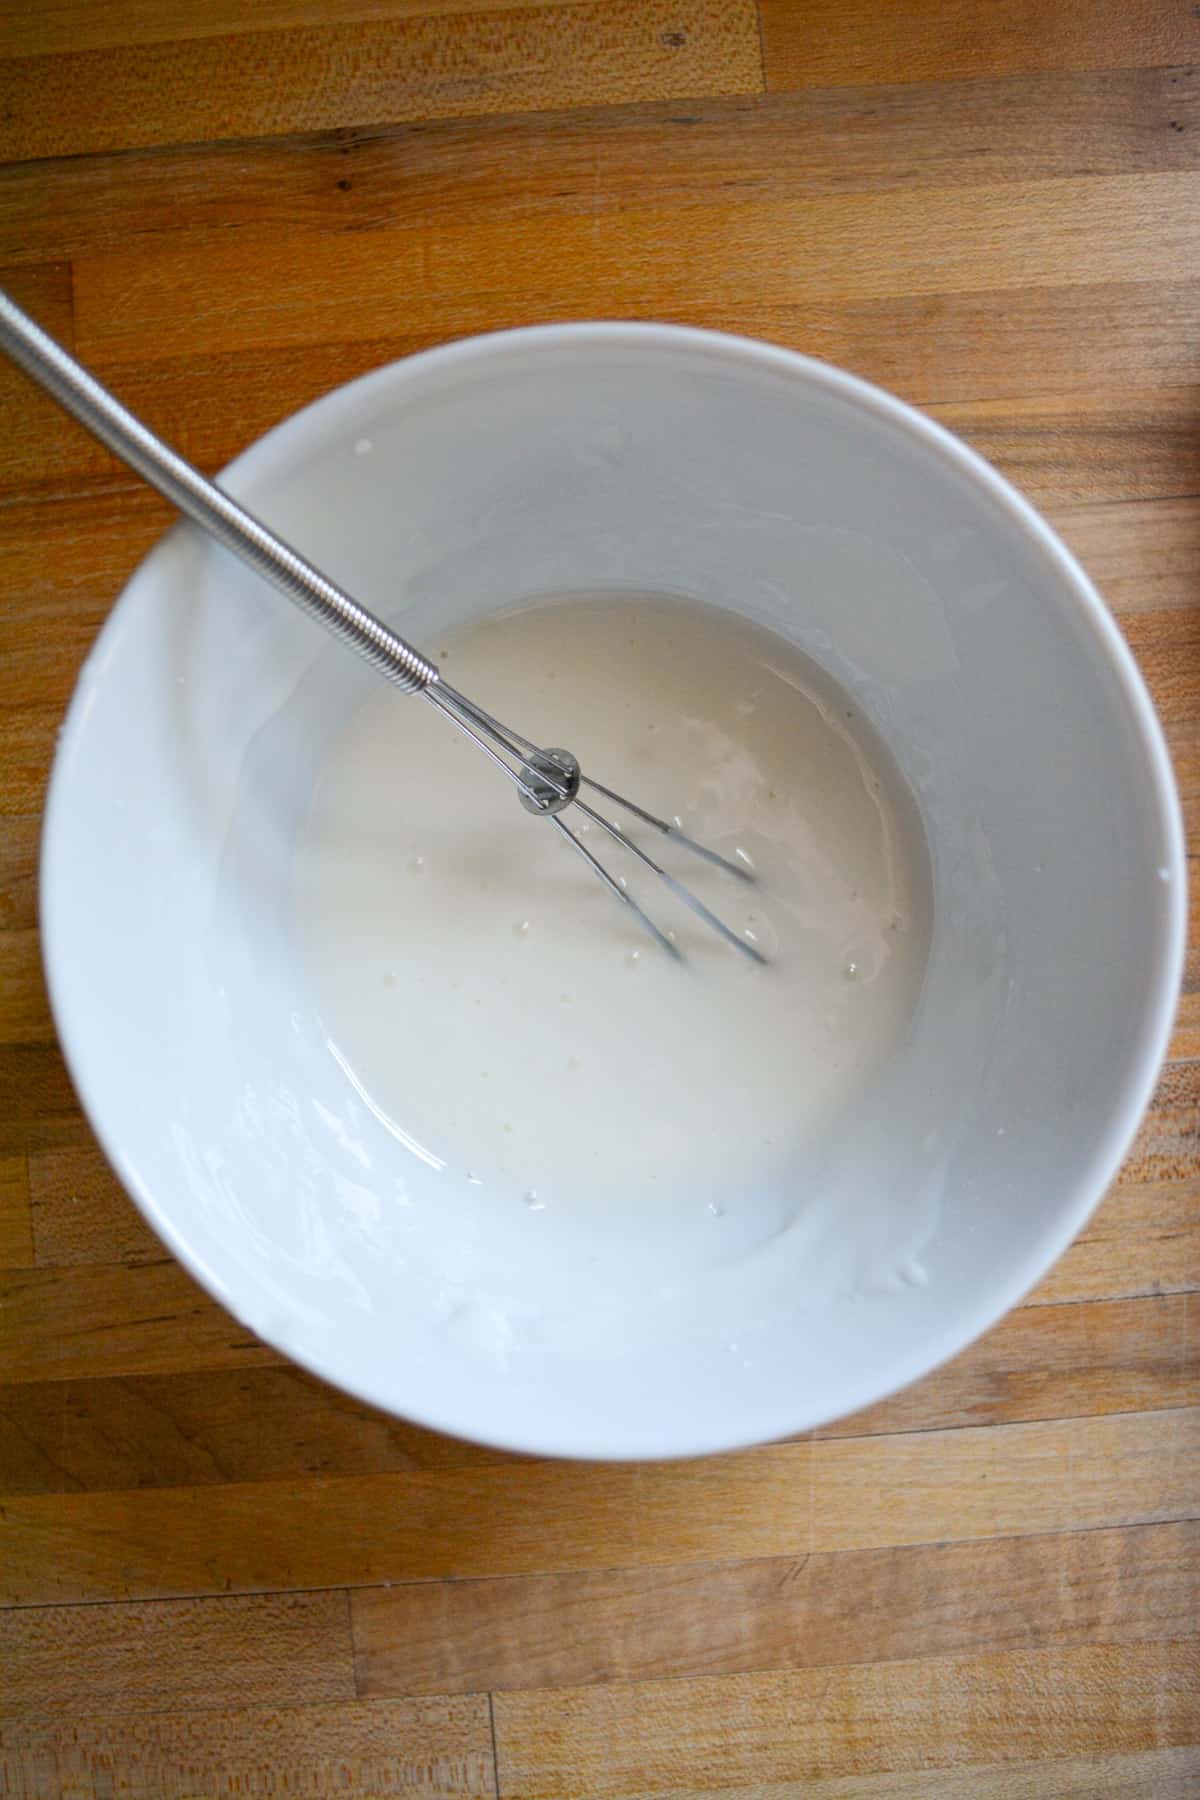 Lemon icing in a white bowl.